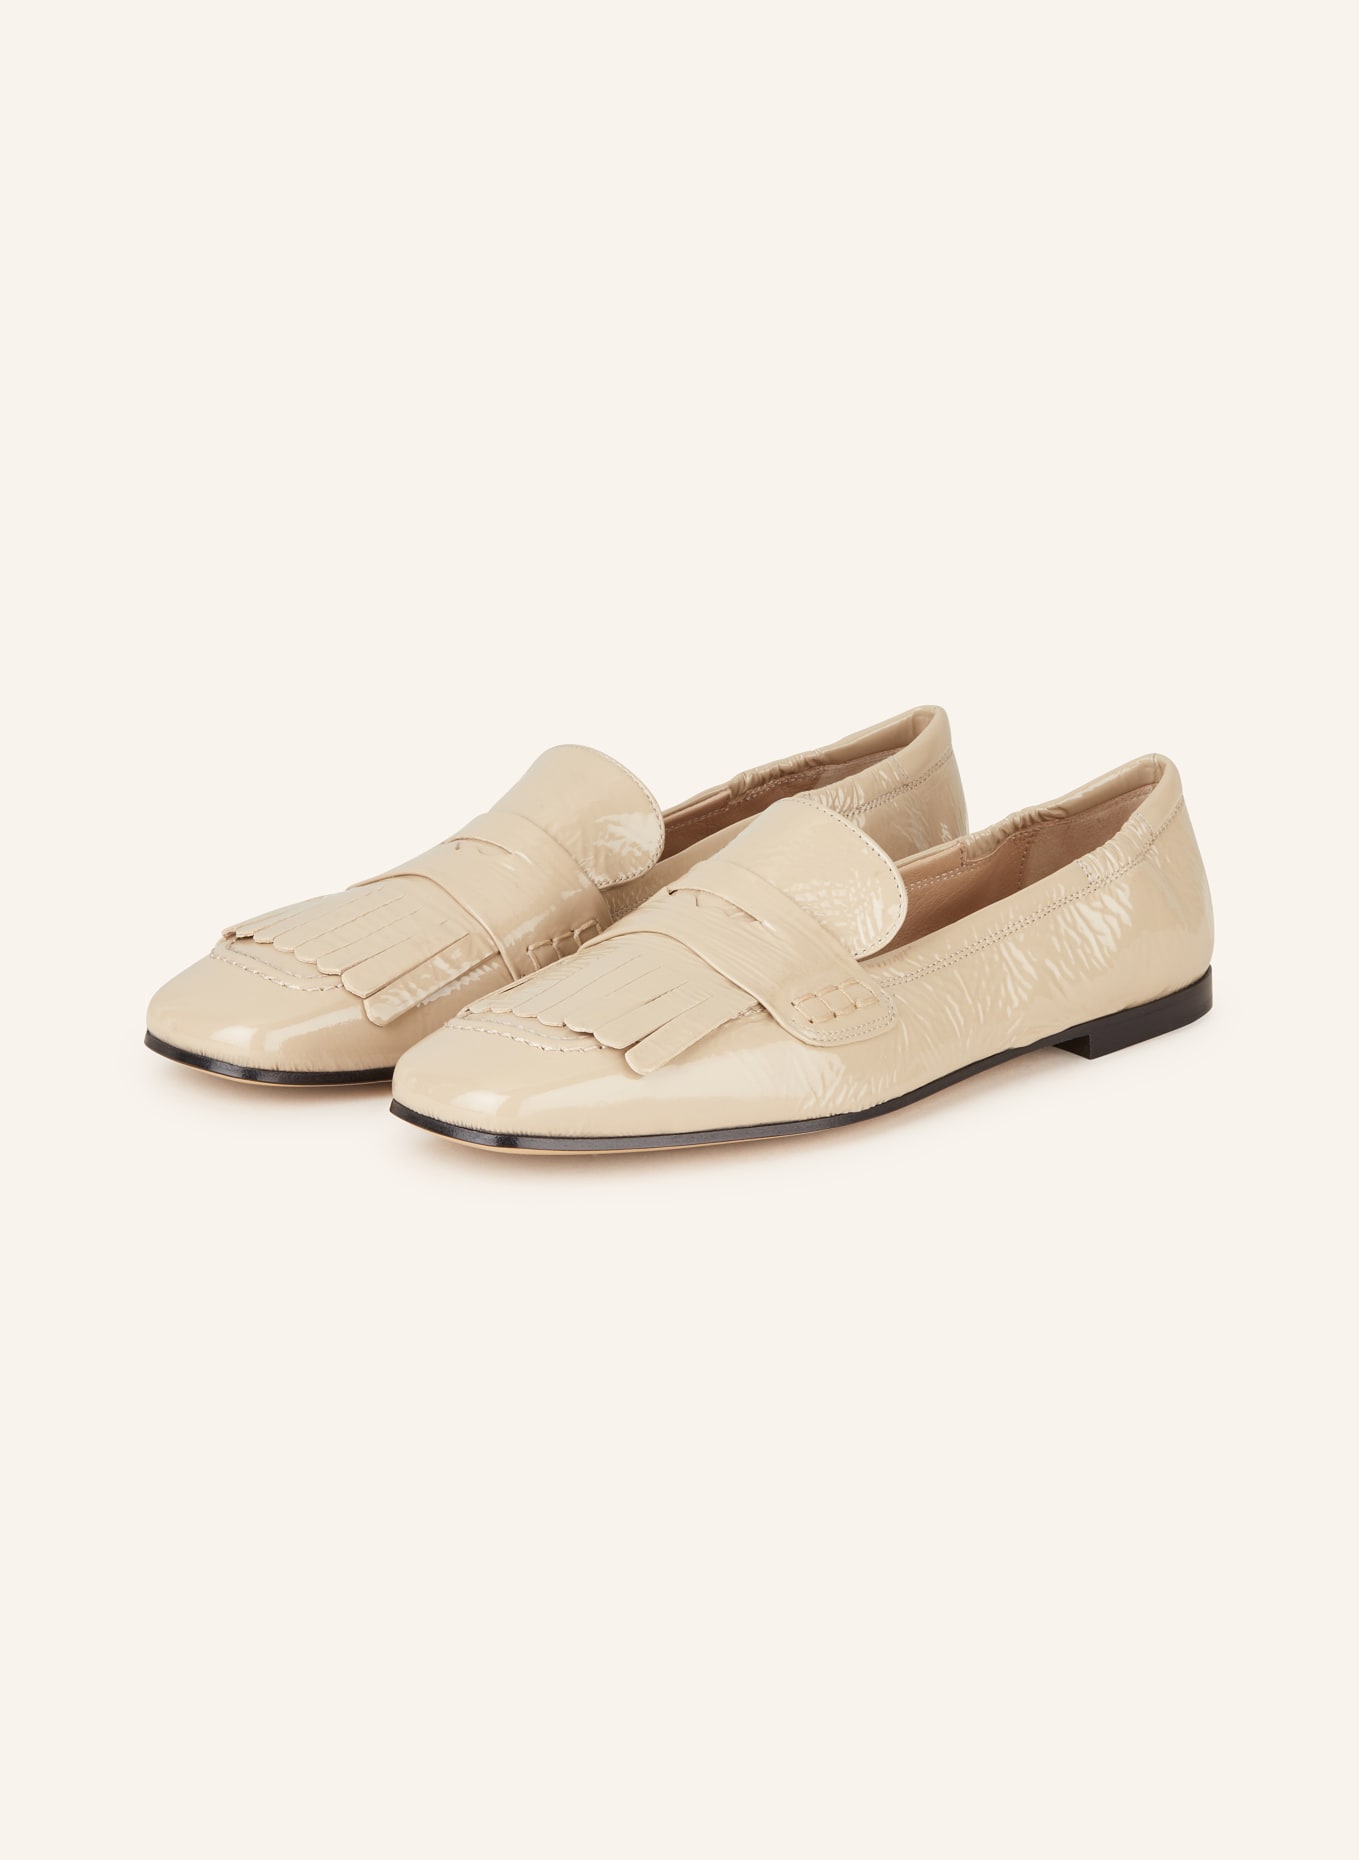 POMME D'OR Penny-Loafer ANGIE, Farbe: BEIGE (Bild 1)